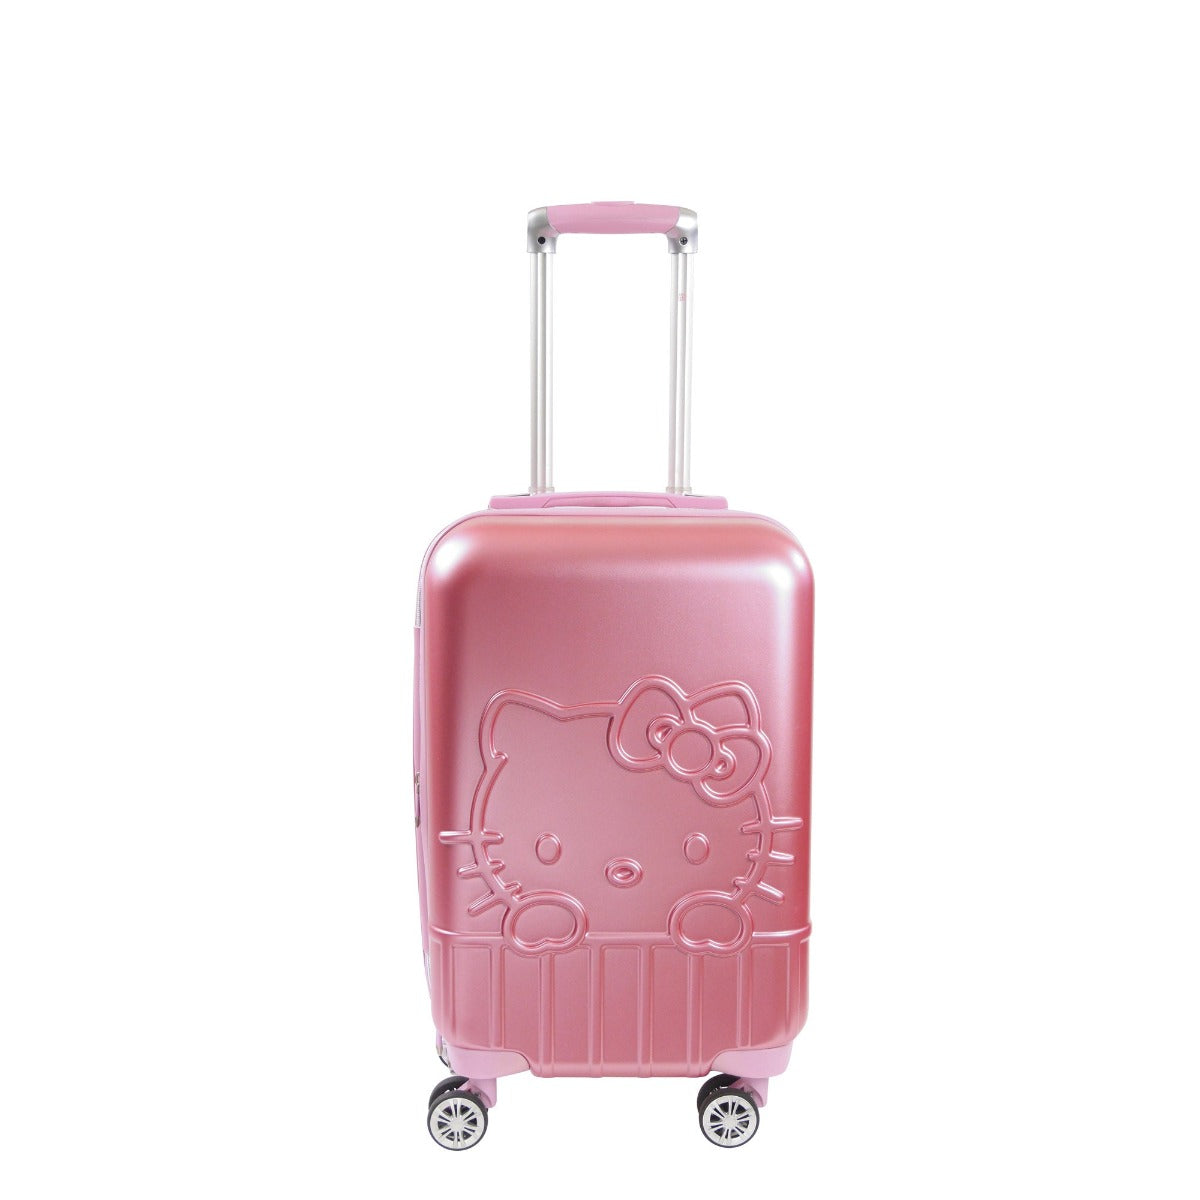 The New Hard Sided Trolley Case